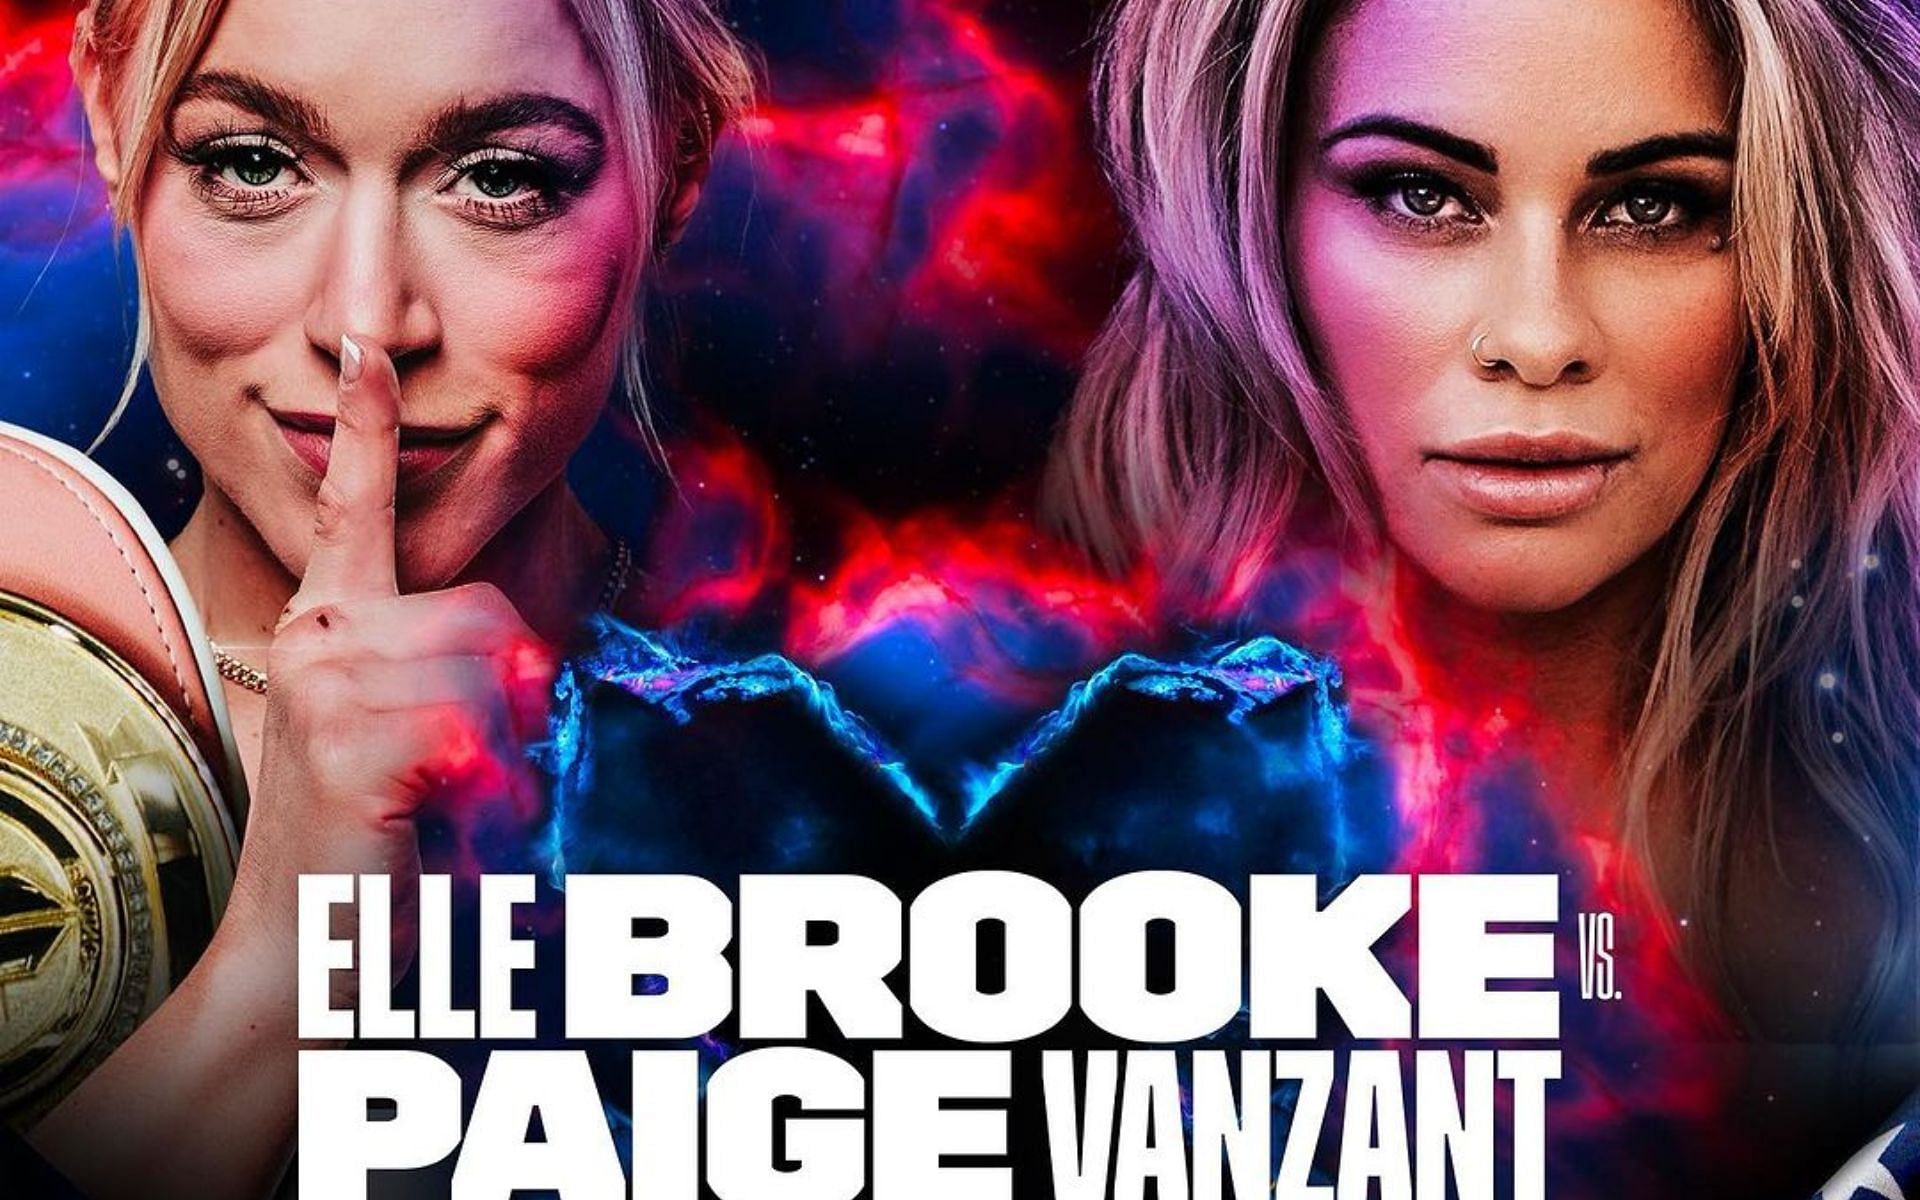 Elle Brooke and Paige VanZant fought on May 25 [Image credits: mf_daznxseries on Instagram]